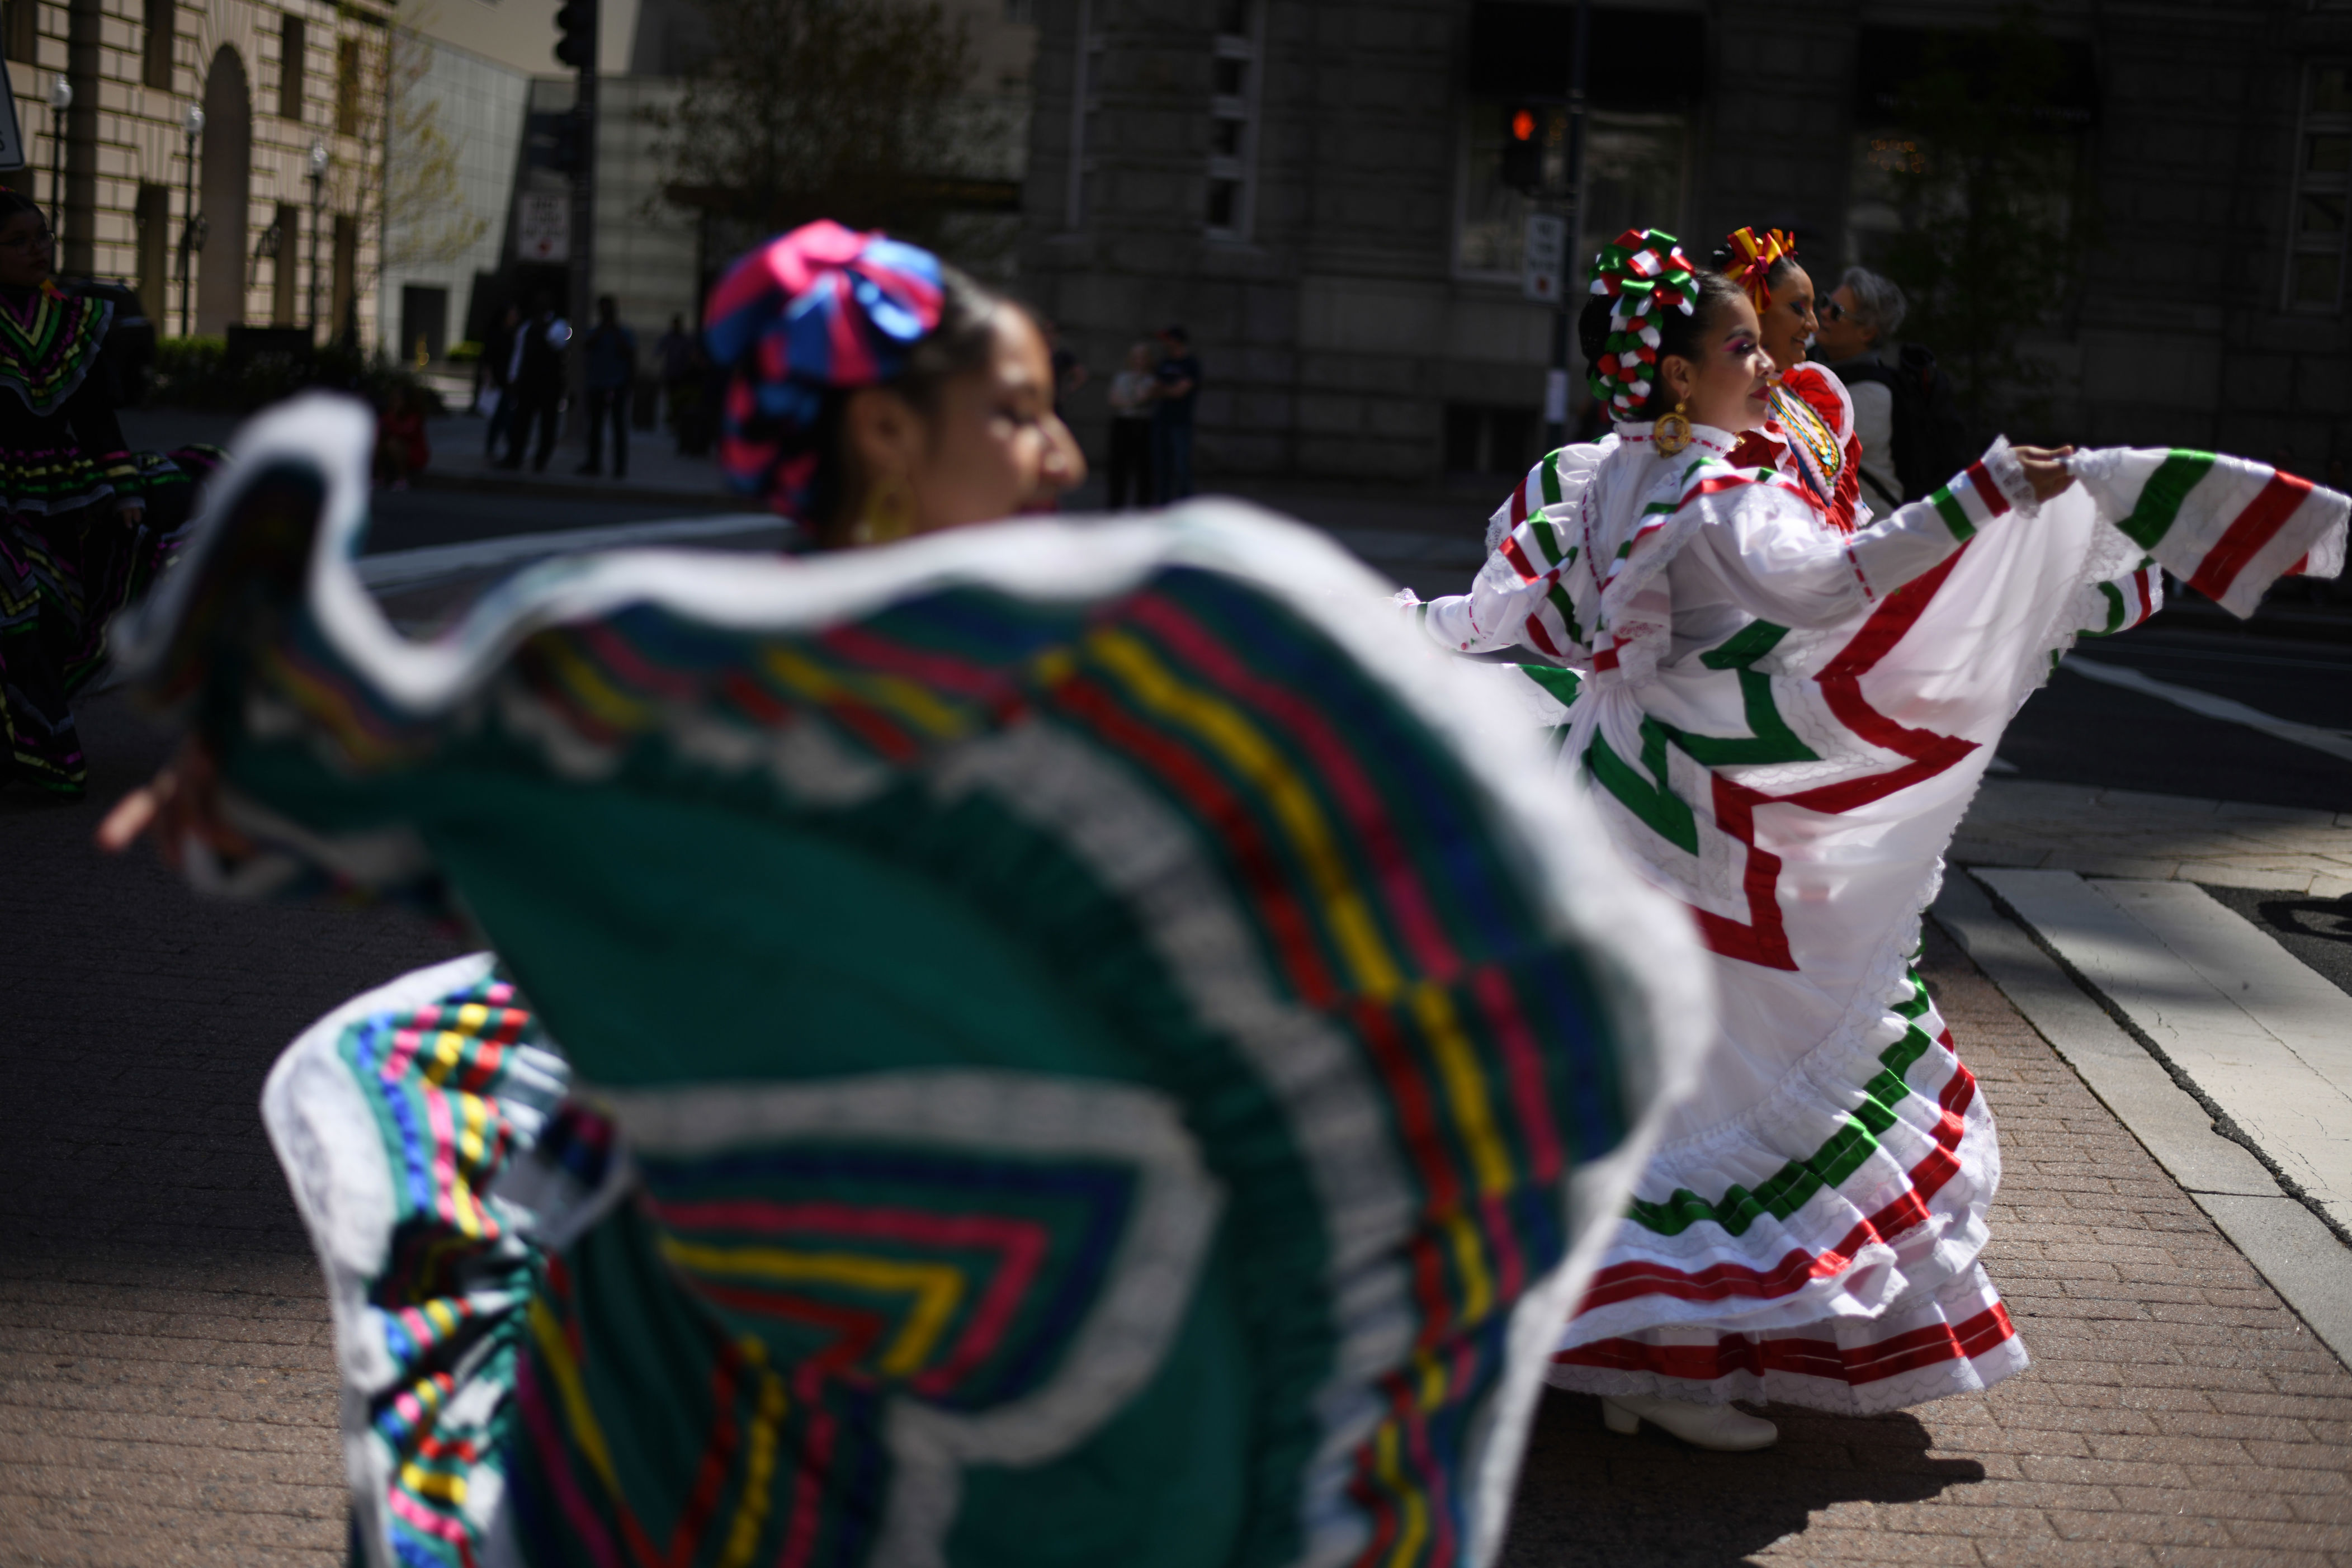 d.c.’s youths dance through emancipation day celebration at freedom plaza